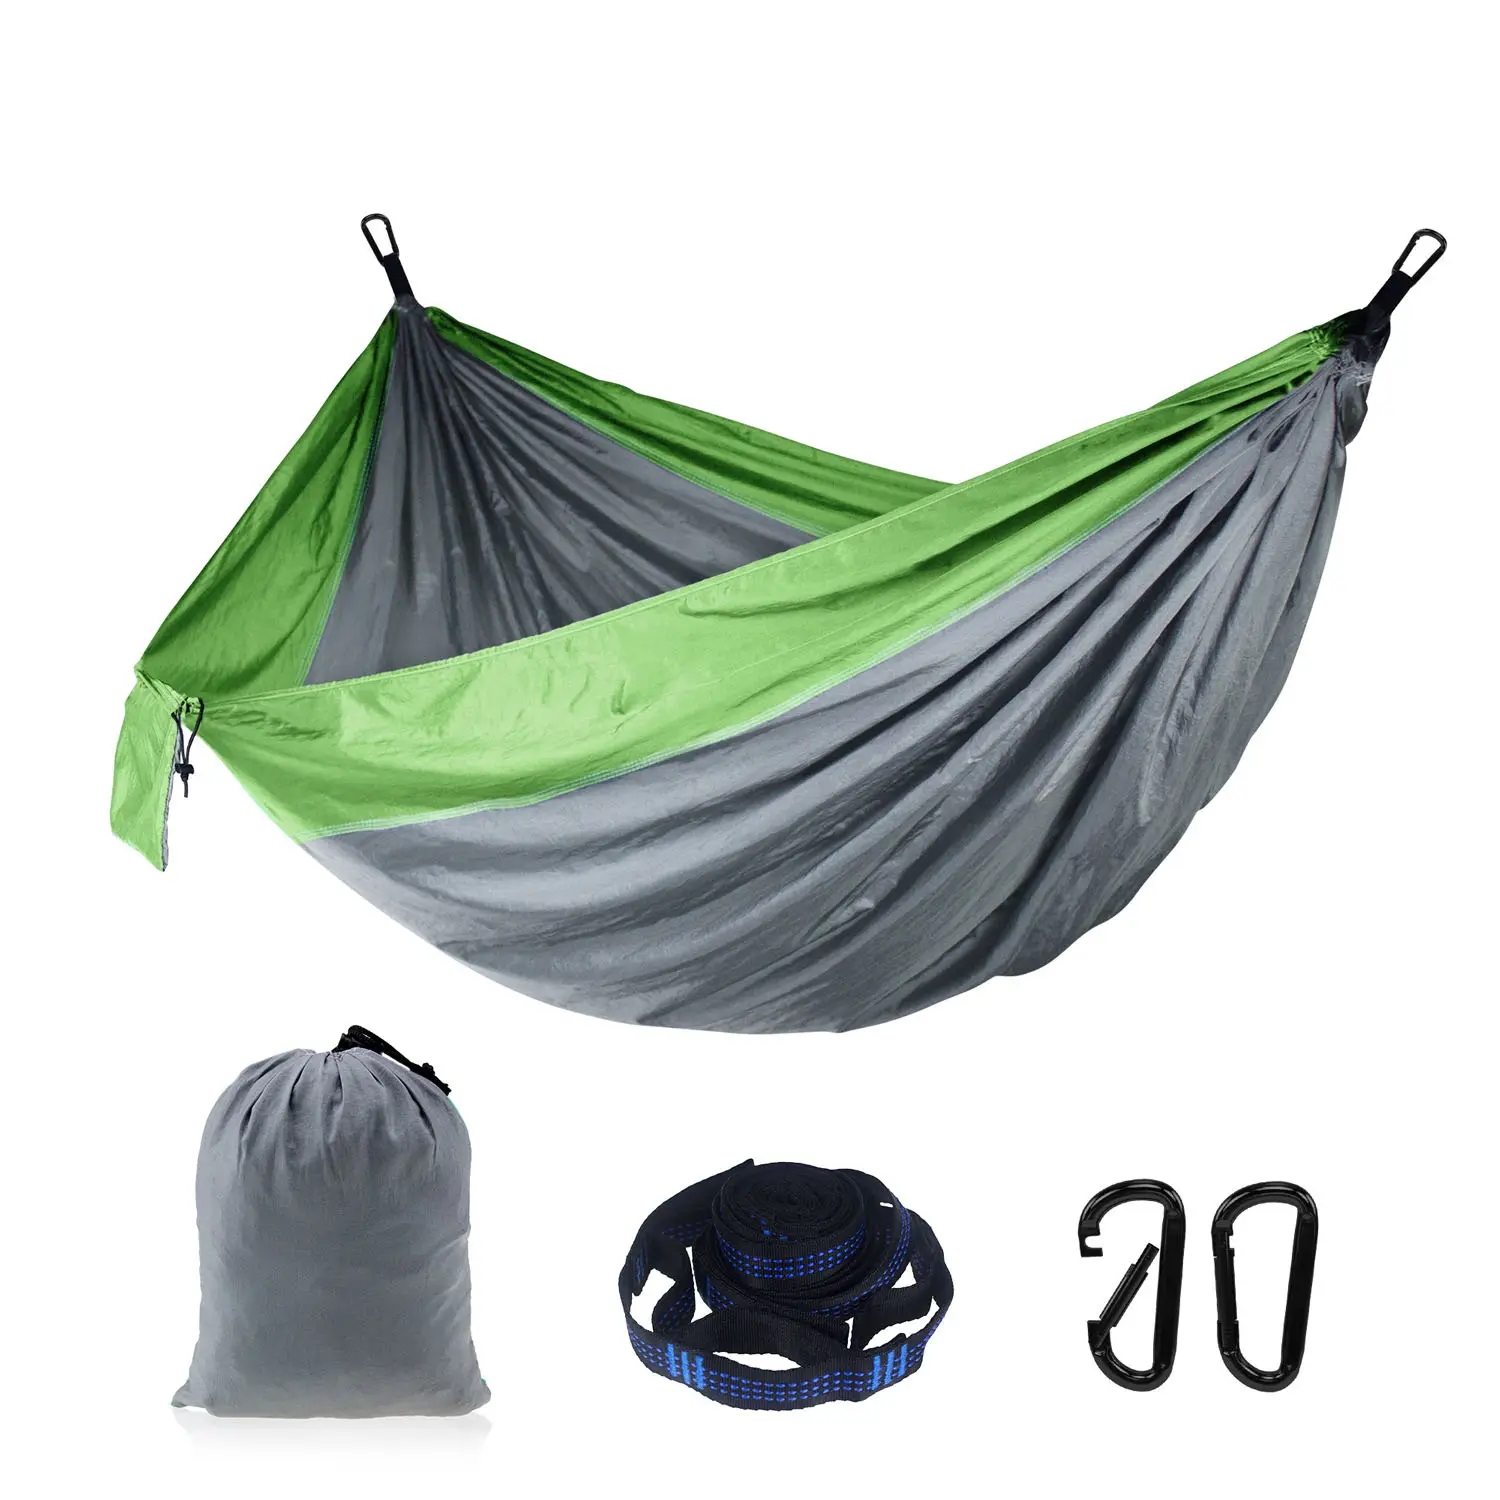 Wholesale hiking foldable extra large beach camouflage sleeping lightweight camping the hammock